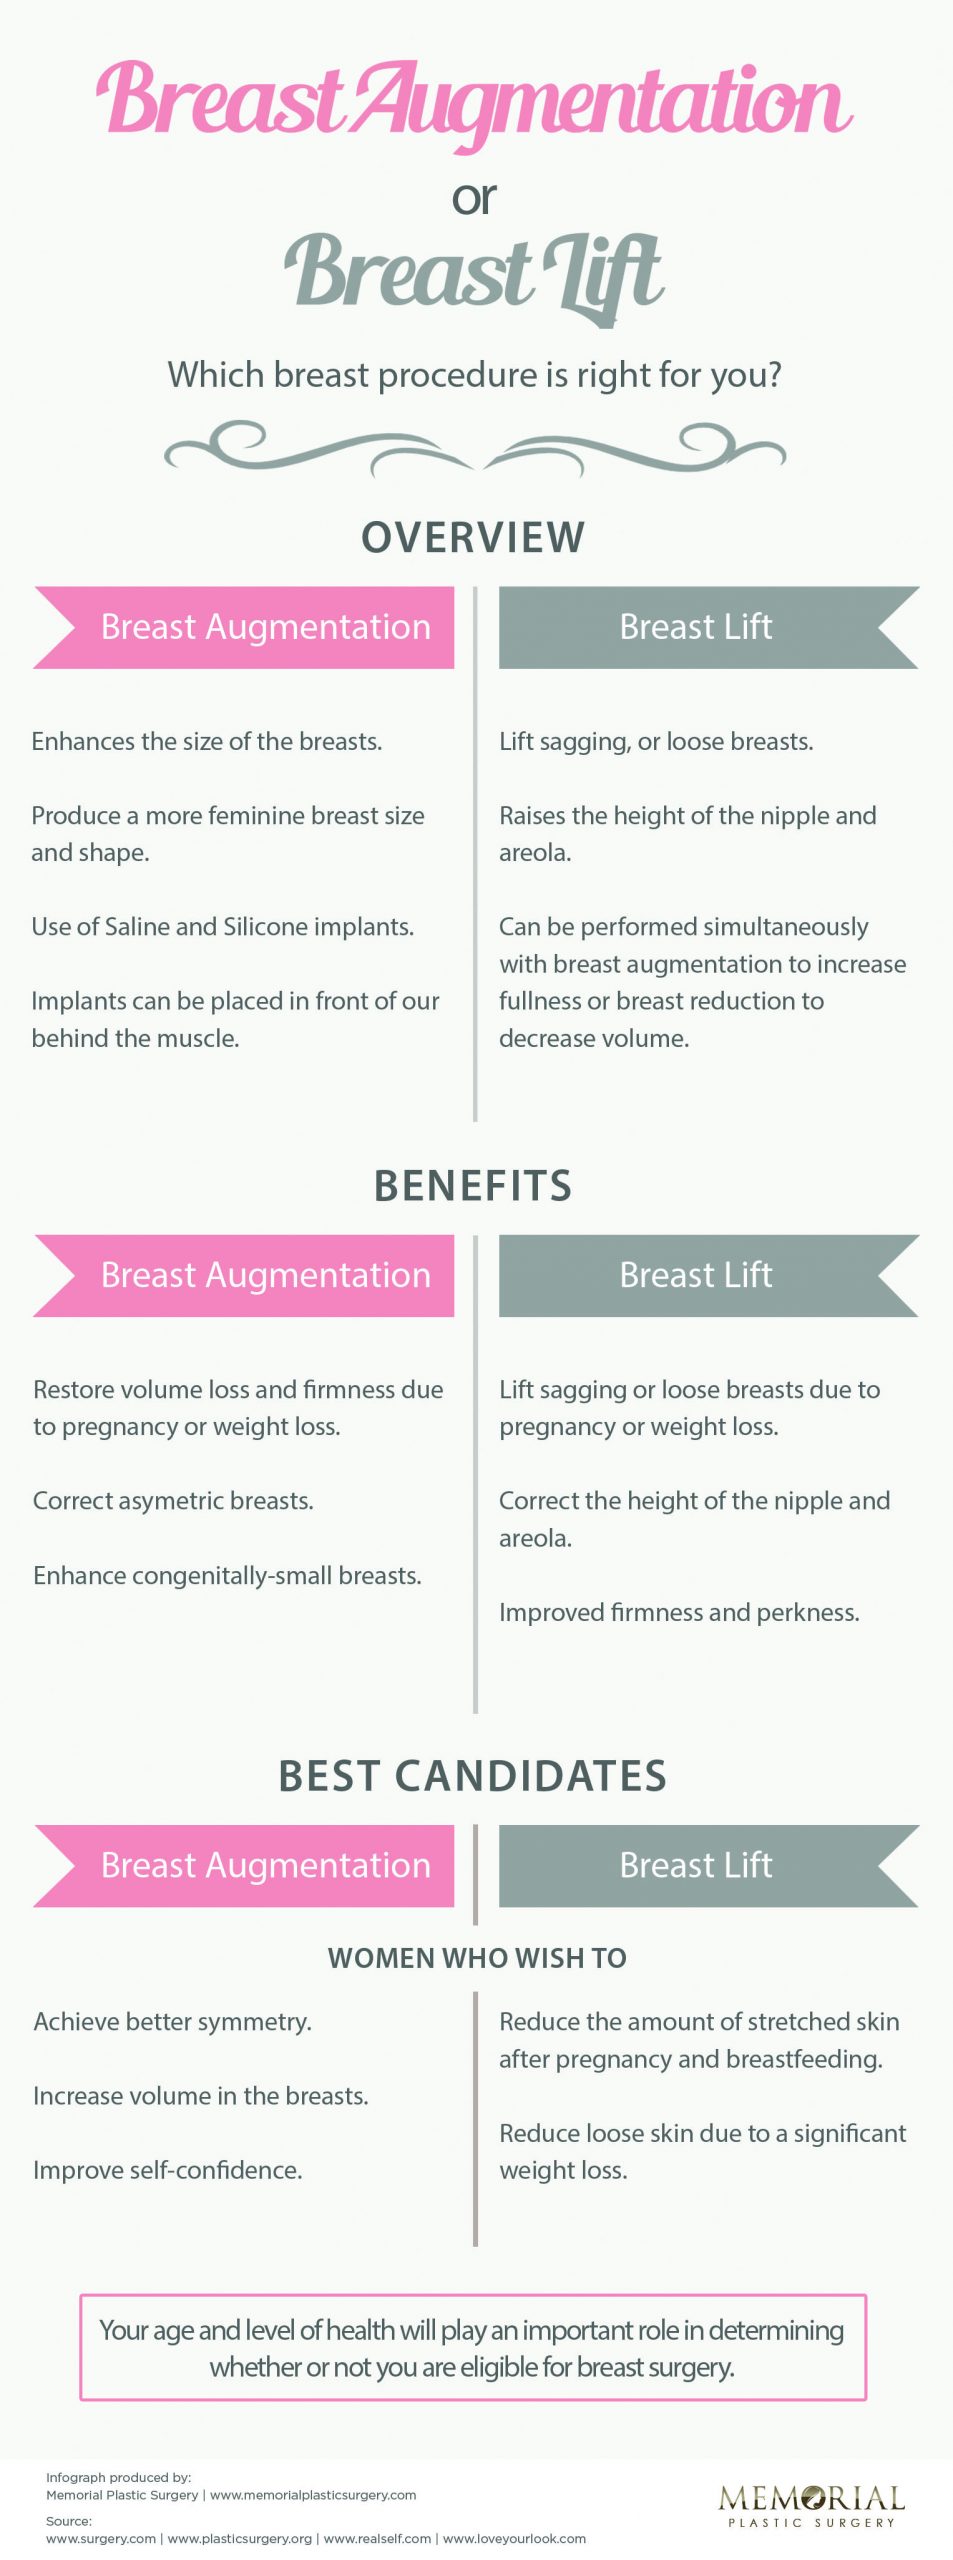 THE BEST BREAST IMPLANTS FOR YOU